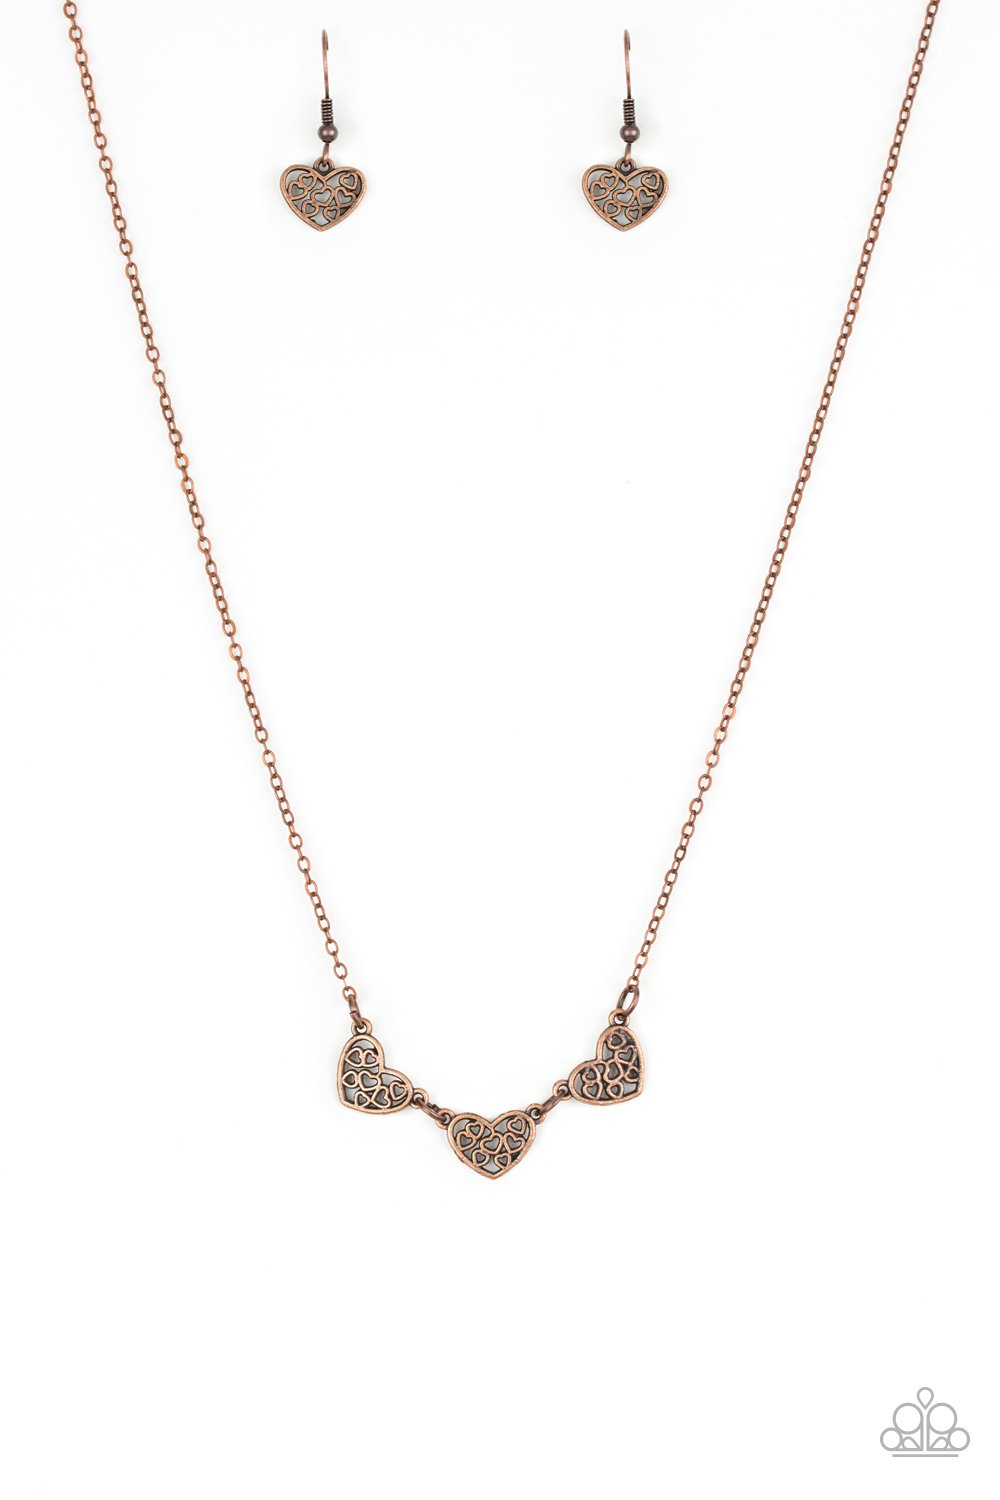 Paparazzi Necklace ~ Another Love Story - Copper